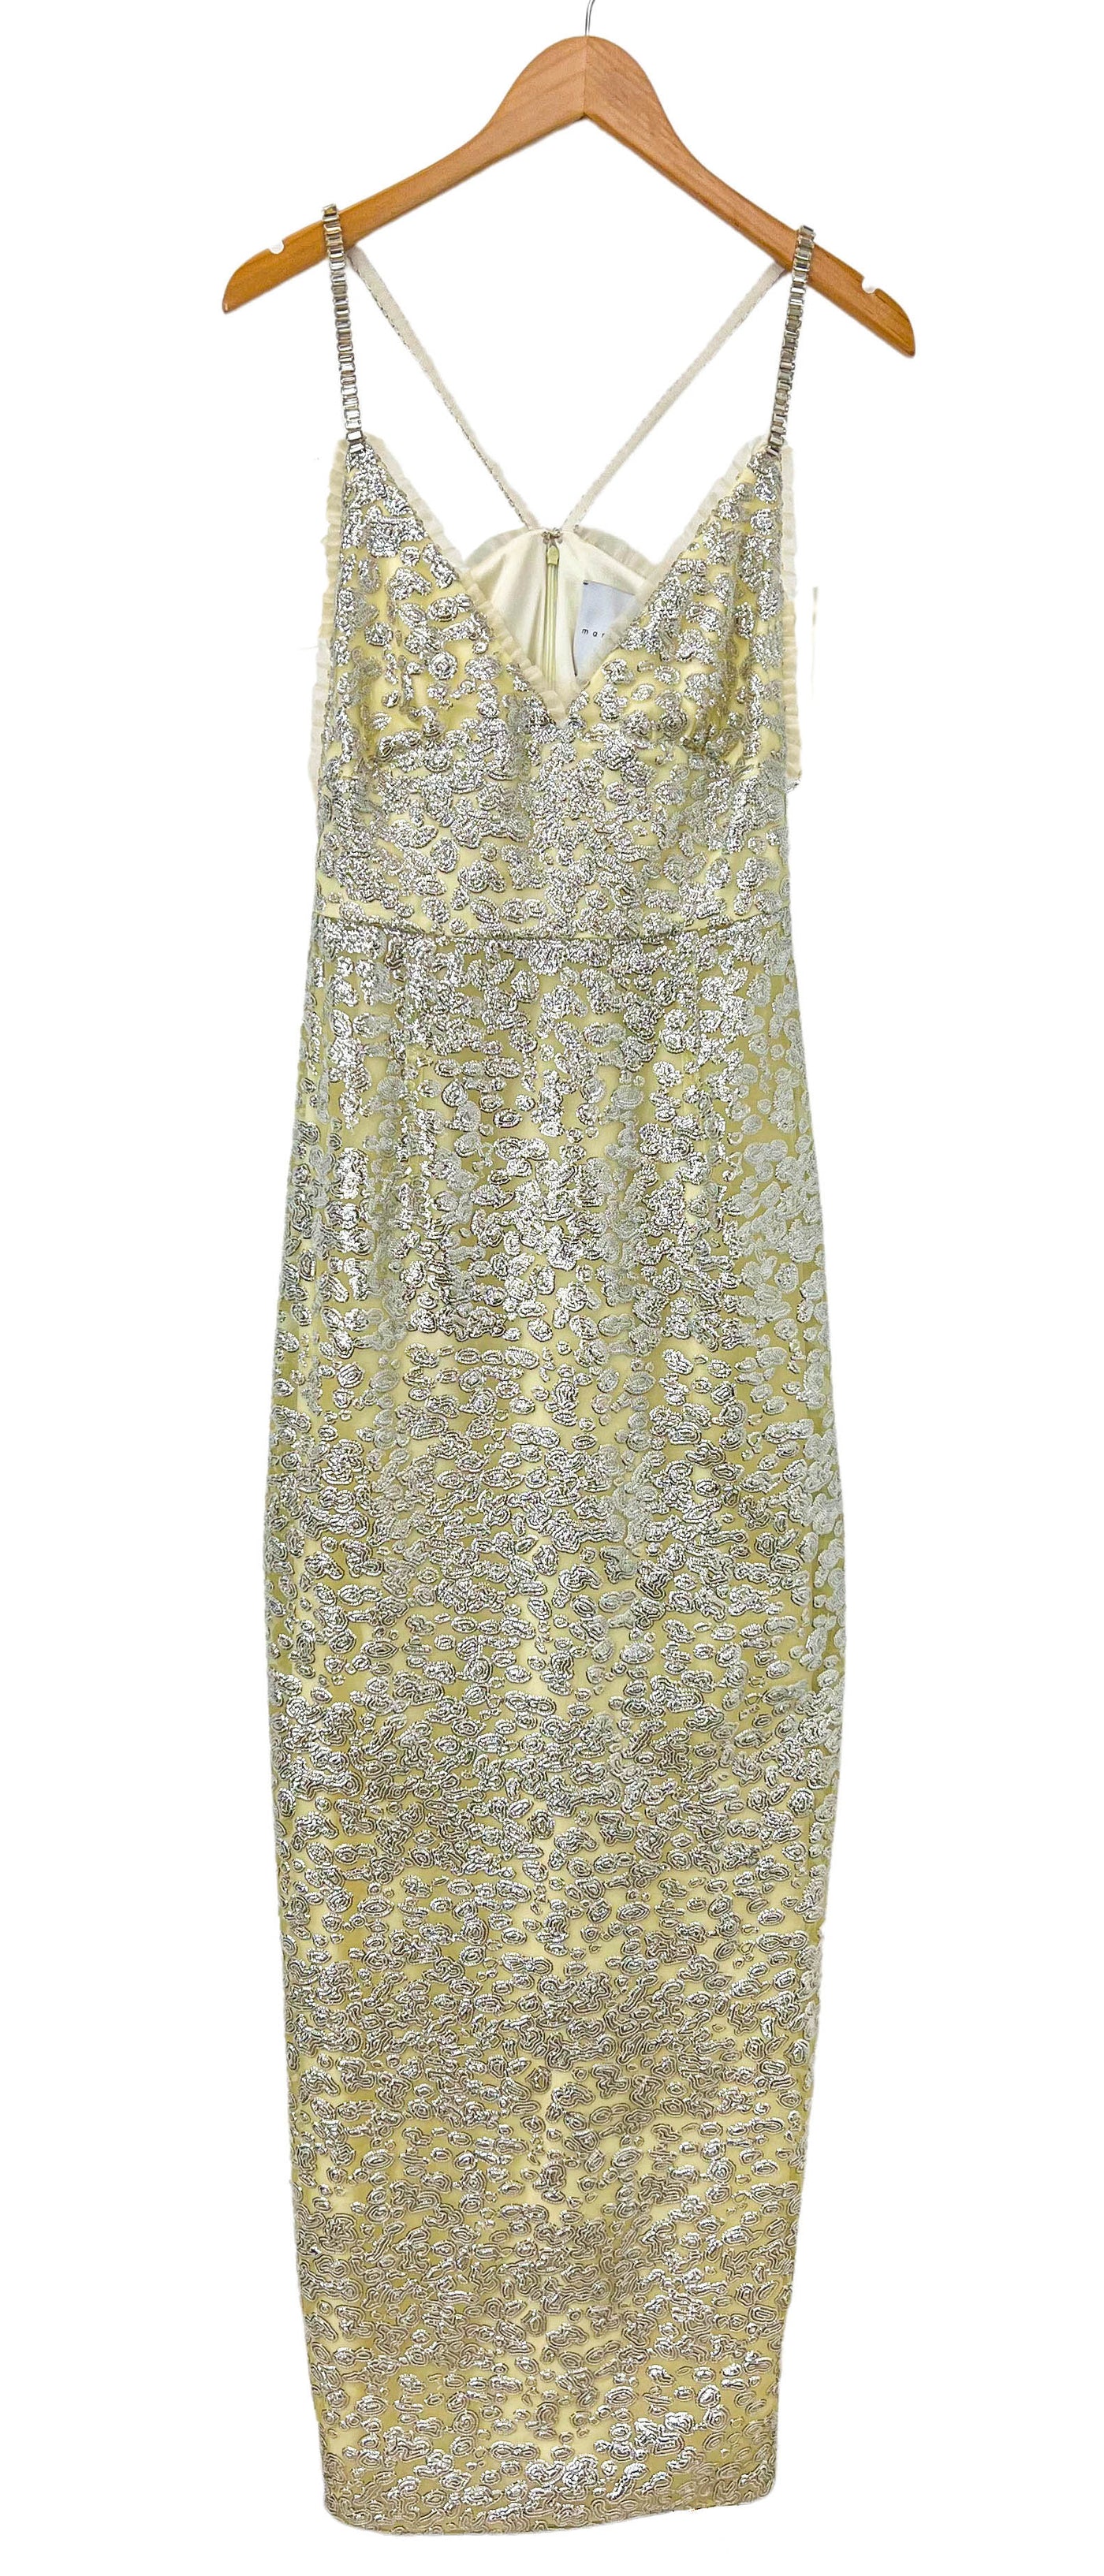 Markarian Beaded Gown in Pale Yellow and Silver - Discounts on Markarian at UAL